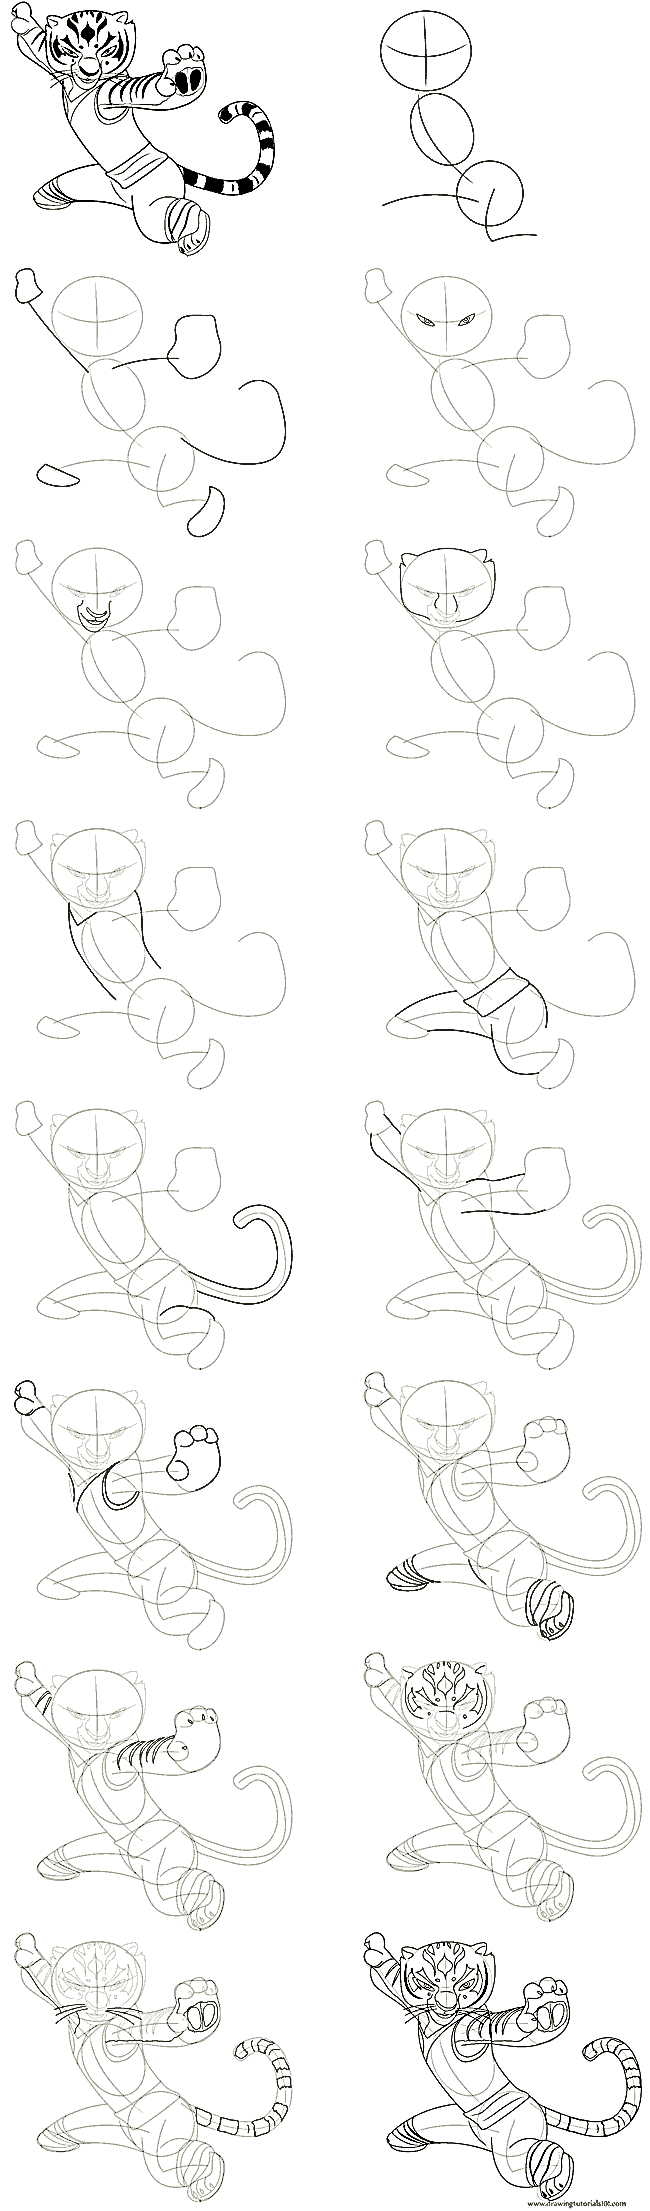 A simple step-by-step way to draw a tiger - Guide 7